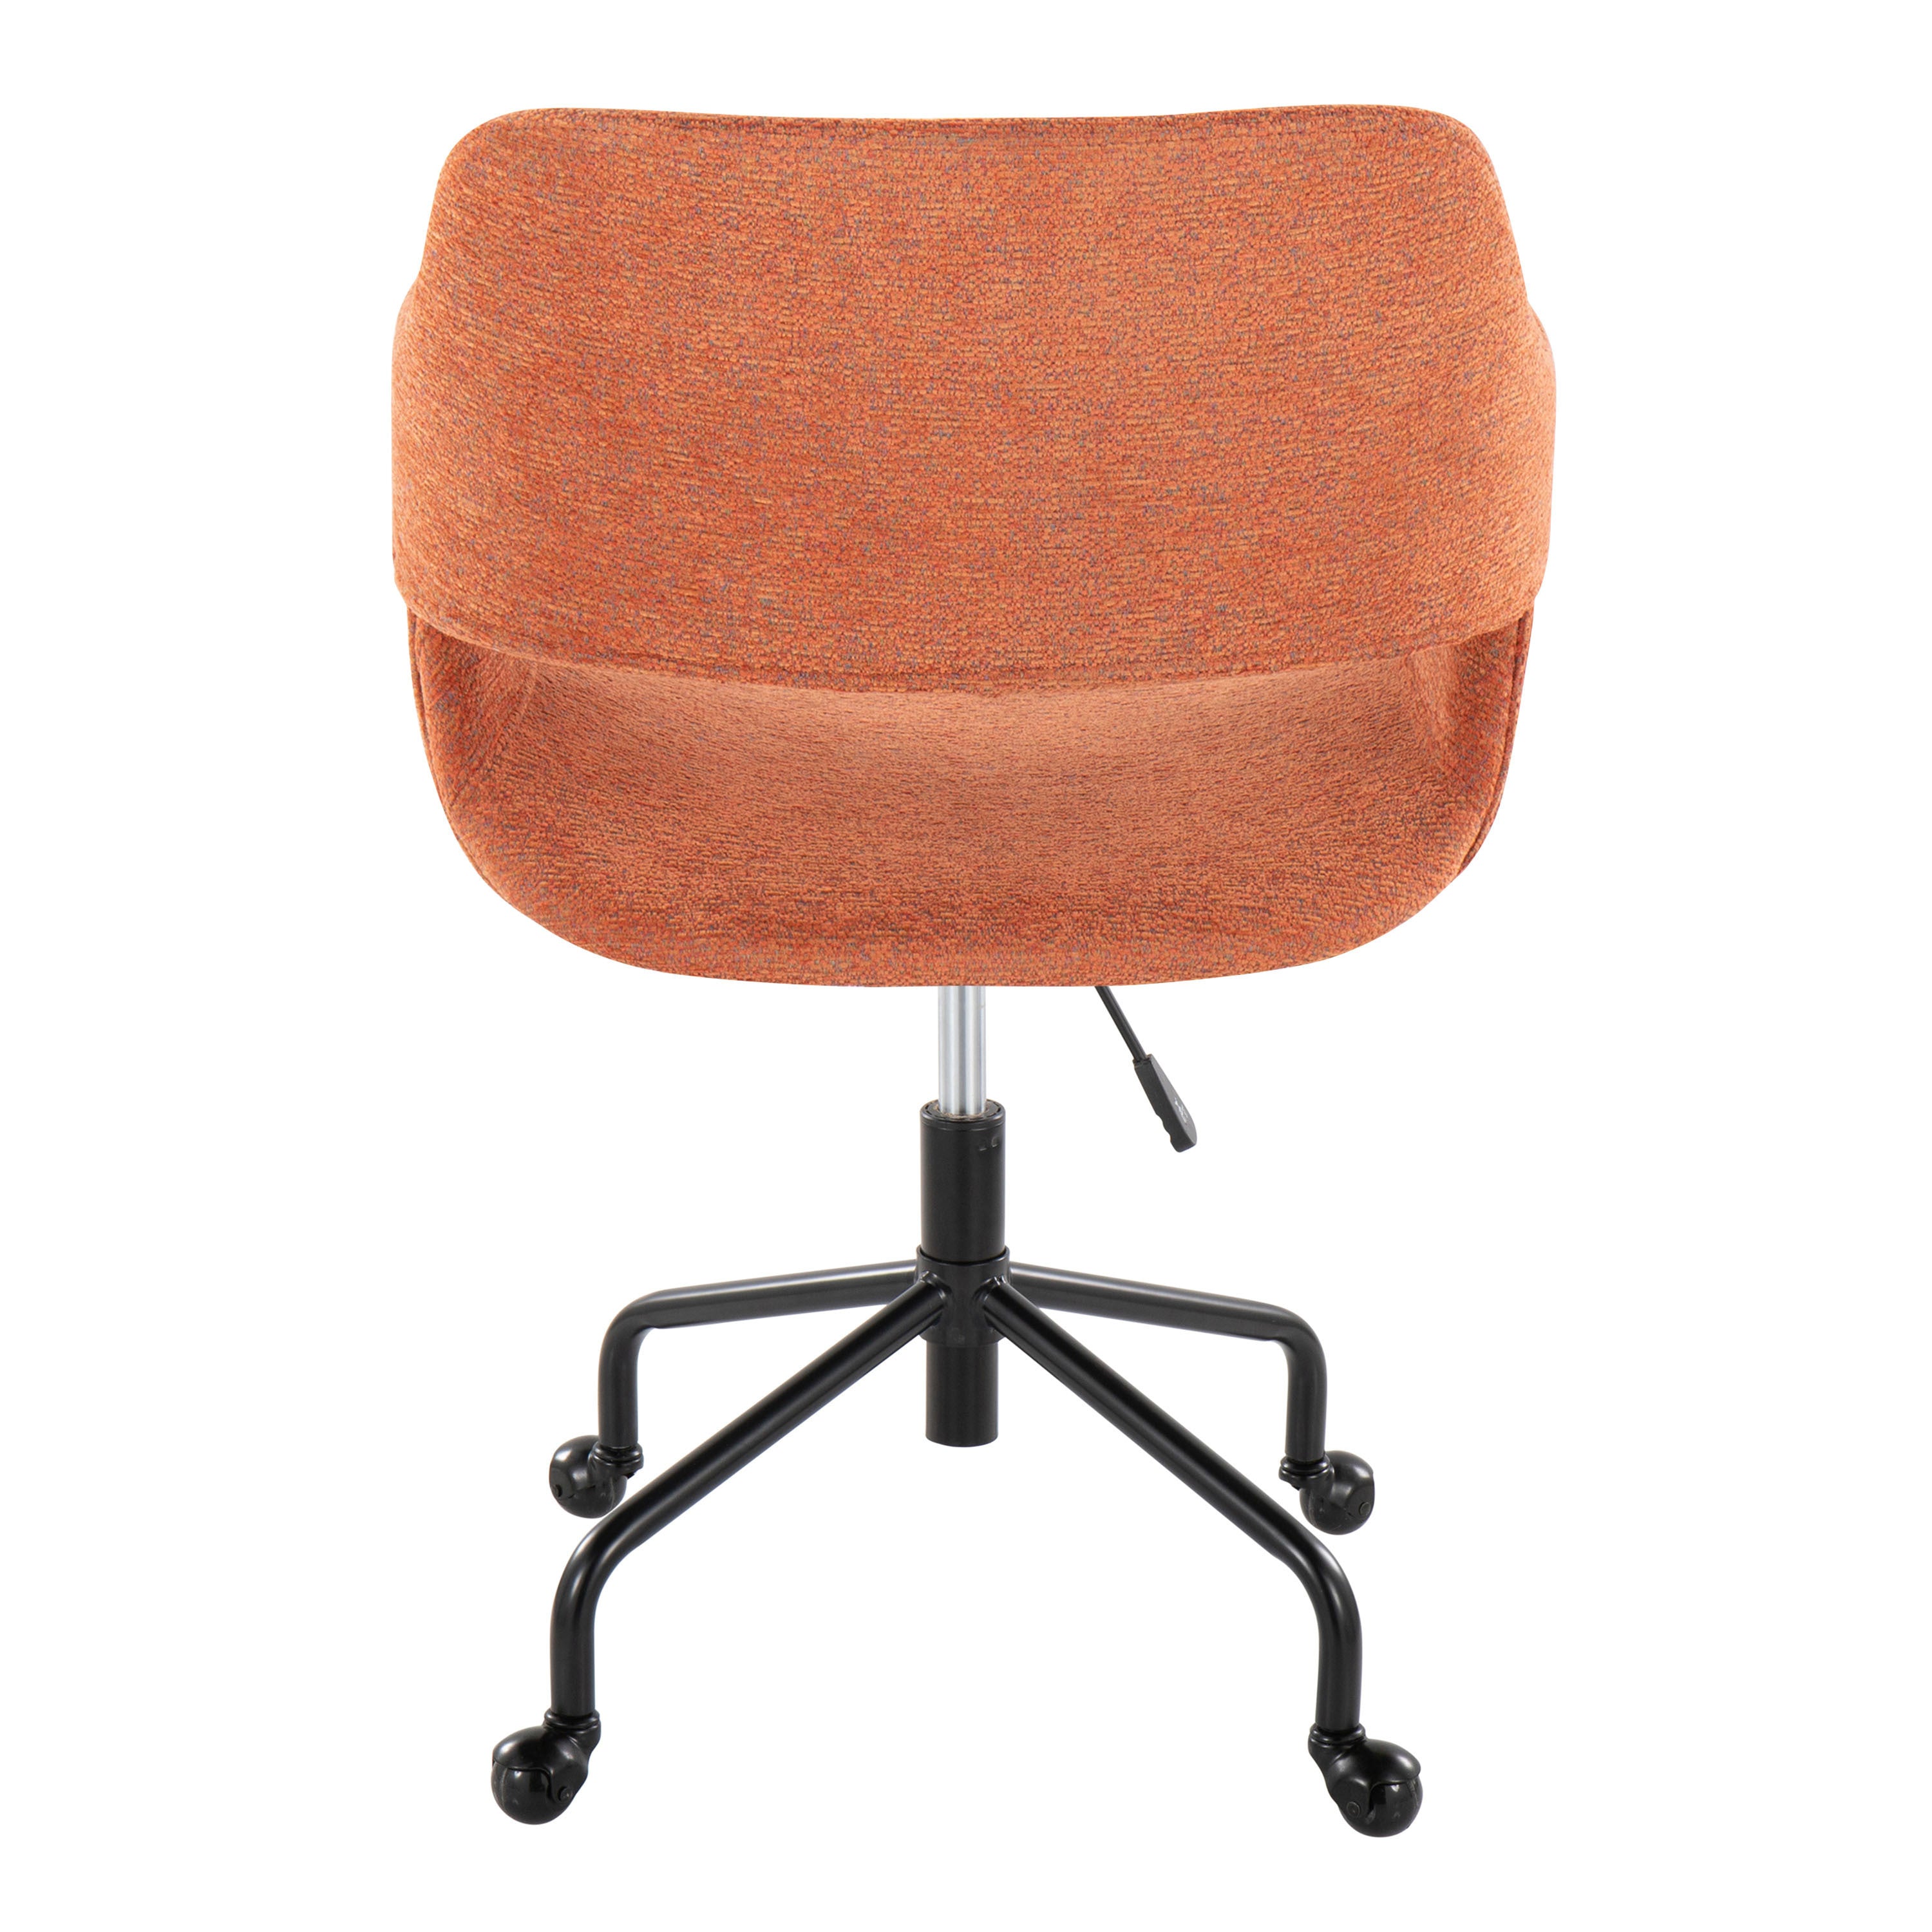 Contemporary Adjustable Office Chair - Black Metal and Orange Fabric